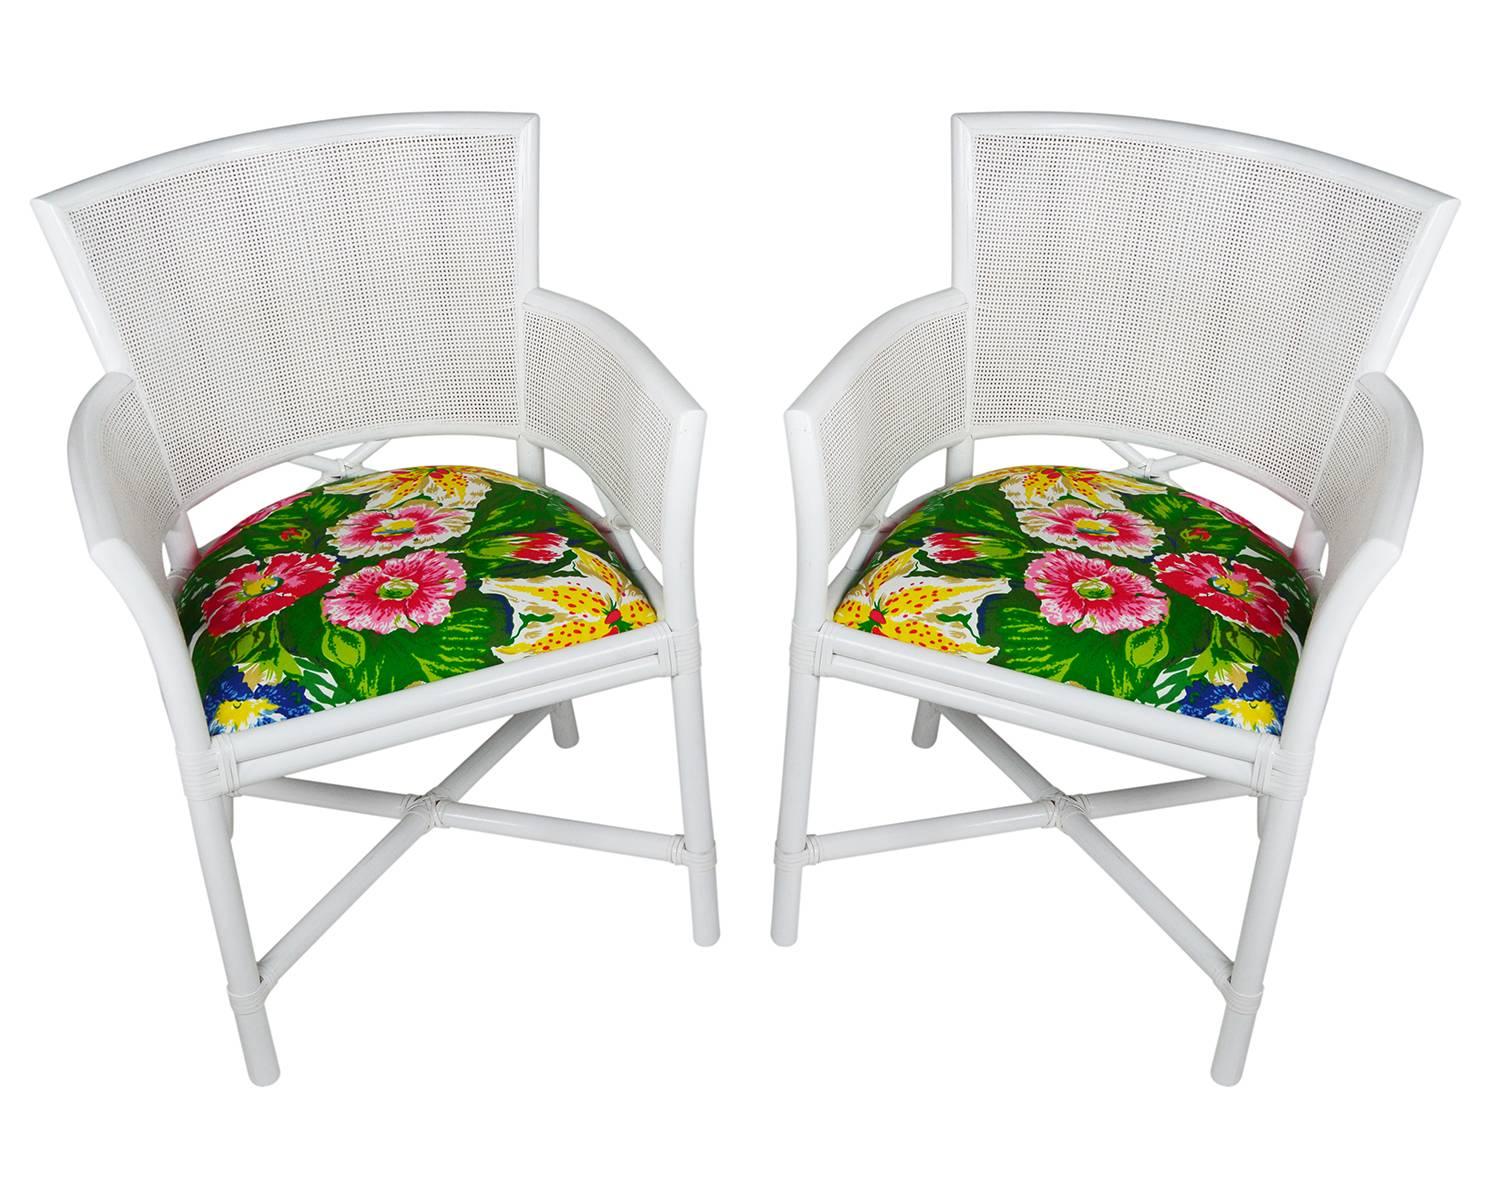 Pair of Ficks Reed armchairs newly lacquered in white. The sleek rattan frame has a caned back and leather windings. The new seat cushion is upholstered in Dorothy's Garden by Dorothy Draper Co.